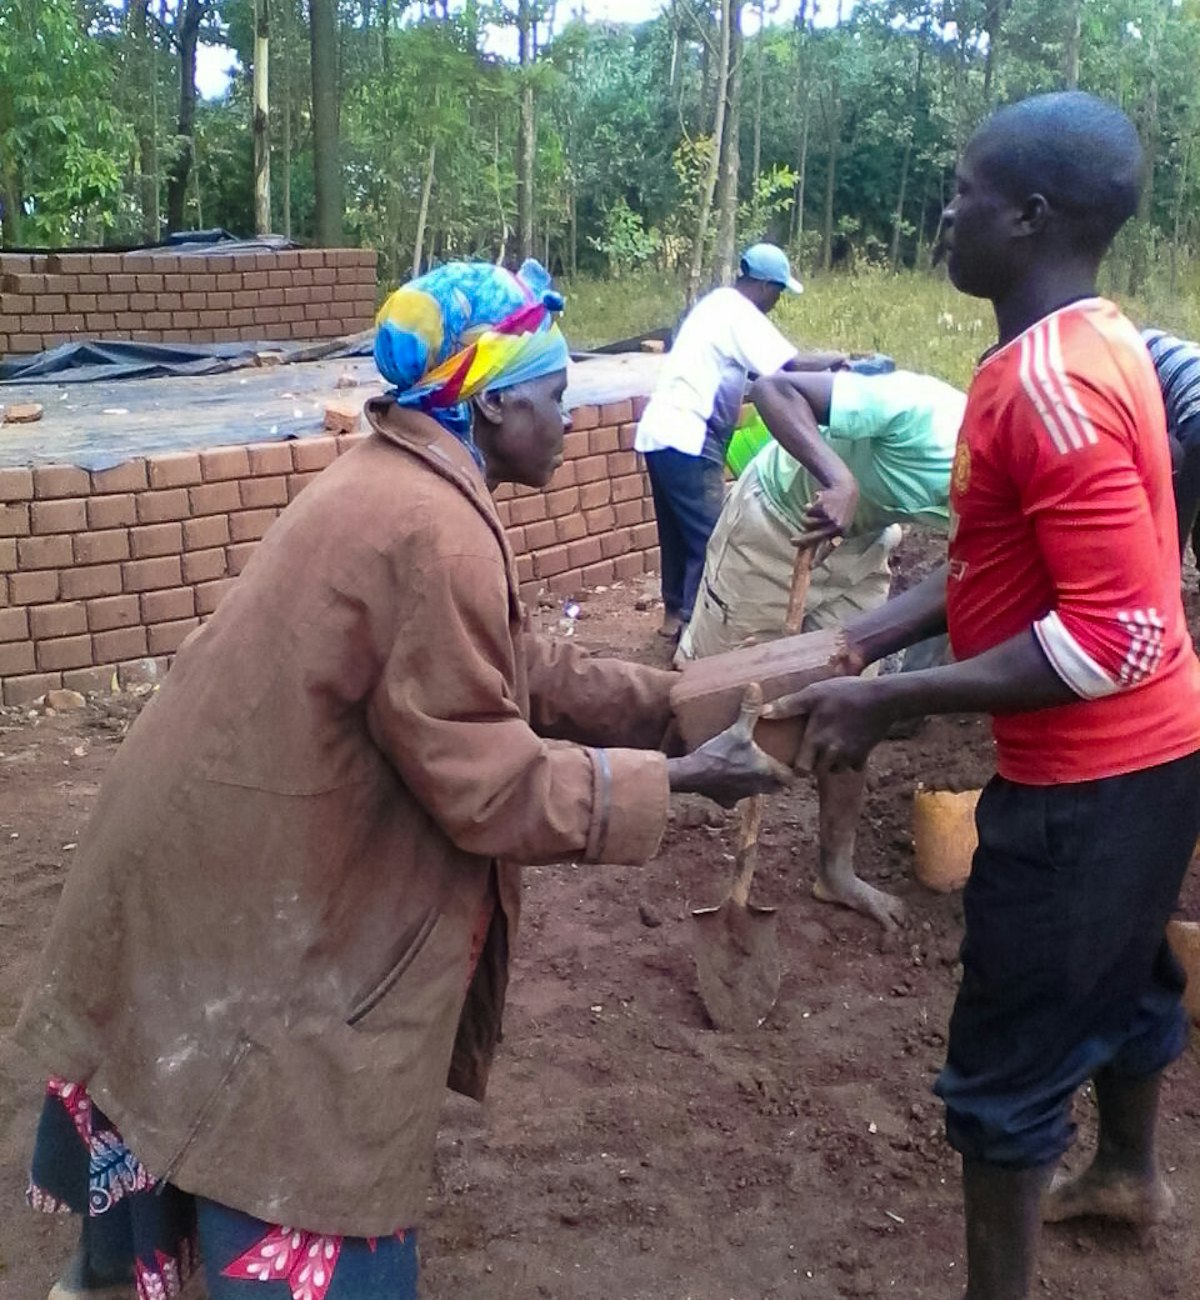 The project to build an educational facility in Namawanga, Kenya, involved broad participation from the community. Similar projects are now under way in other parts of the country.